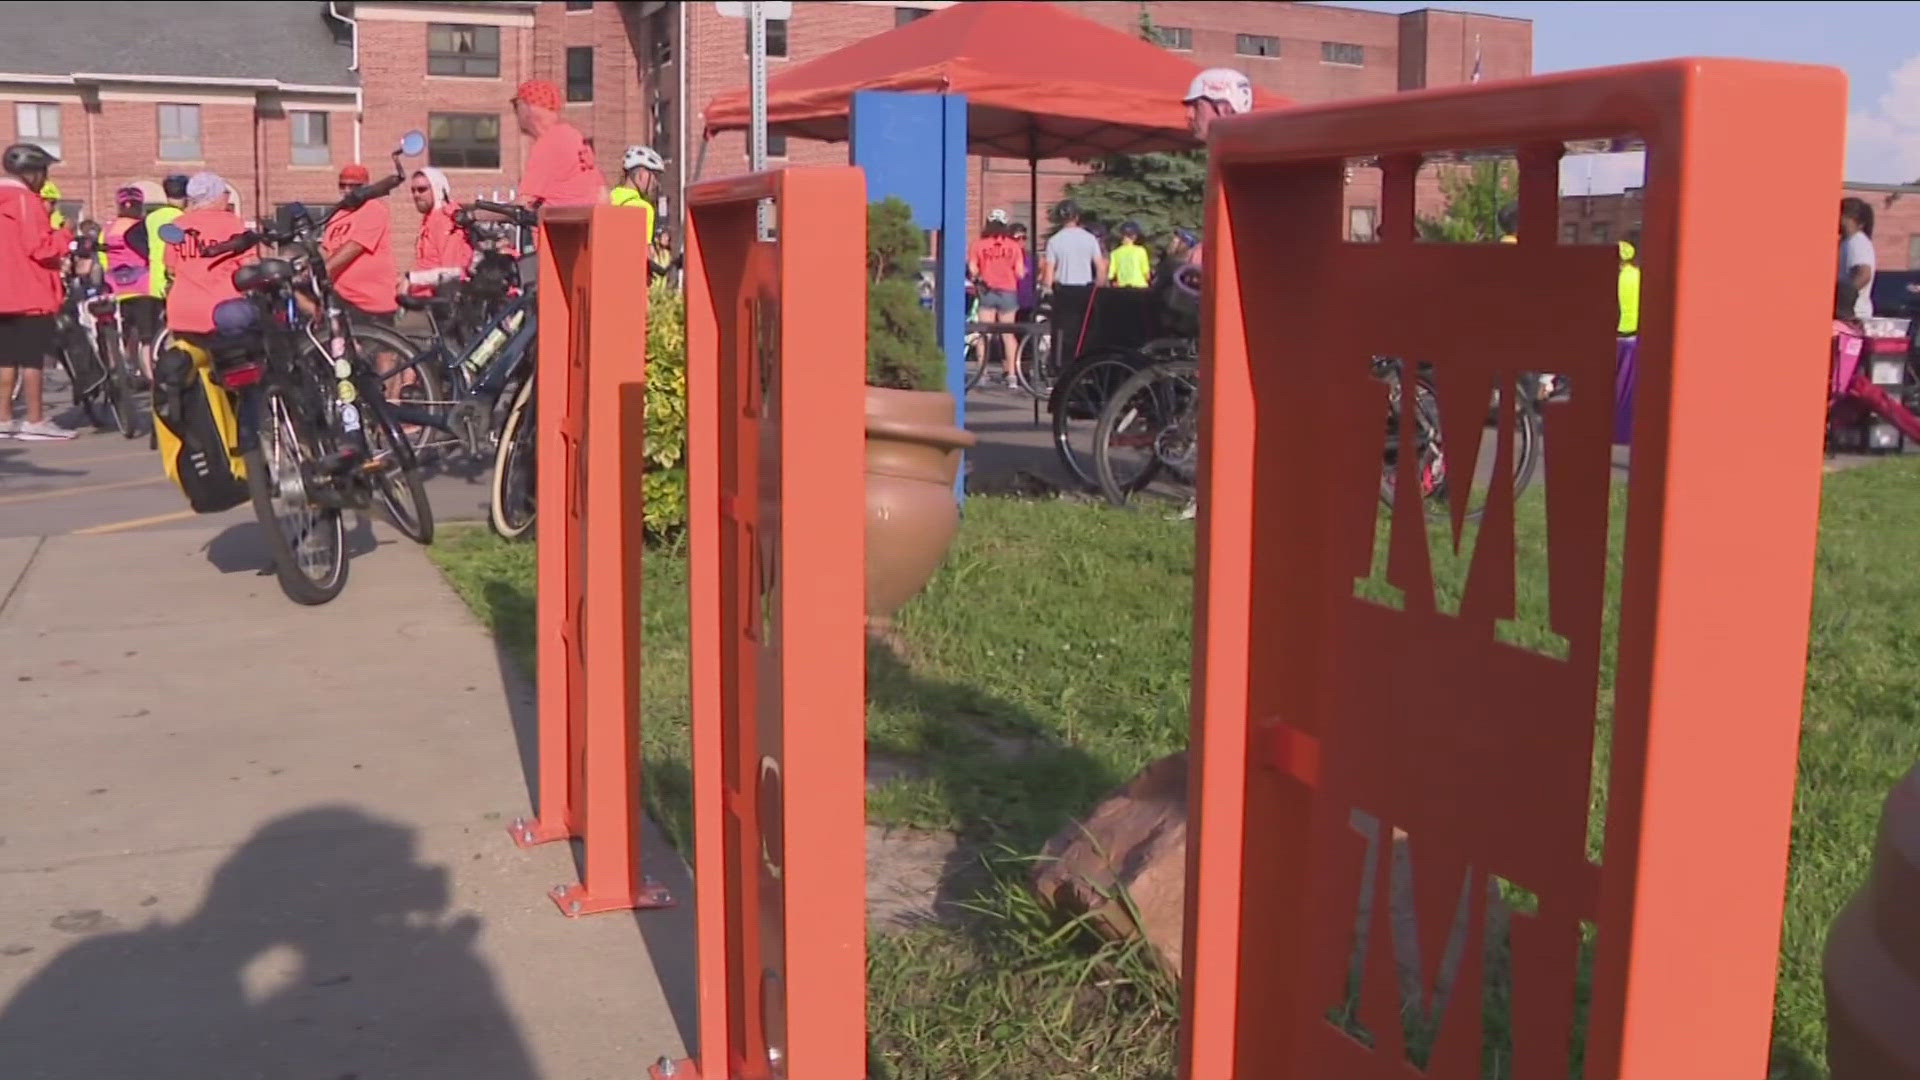 Slow Roll Buffalo partnered with The Foundry to install 22 new bike racks